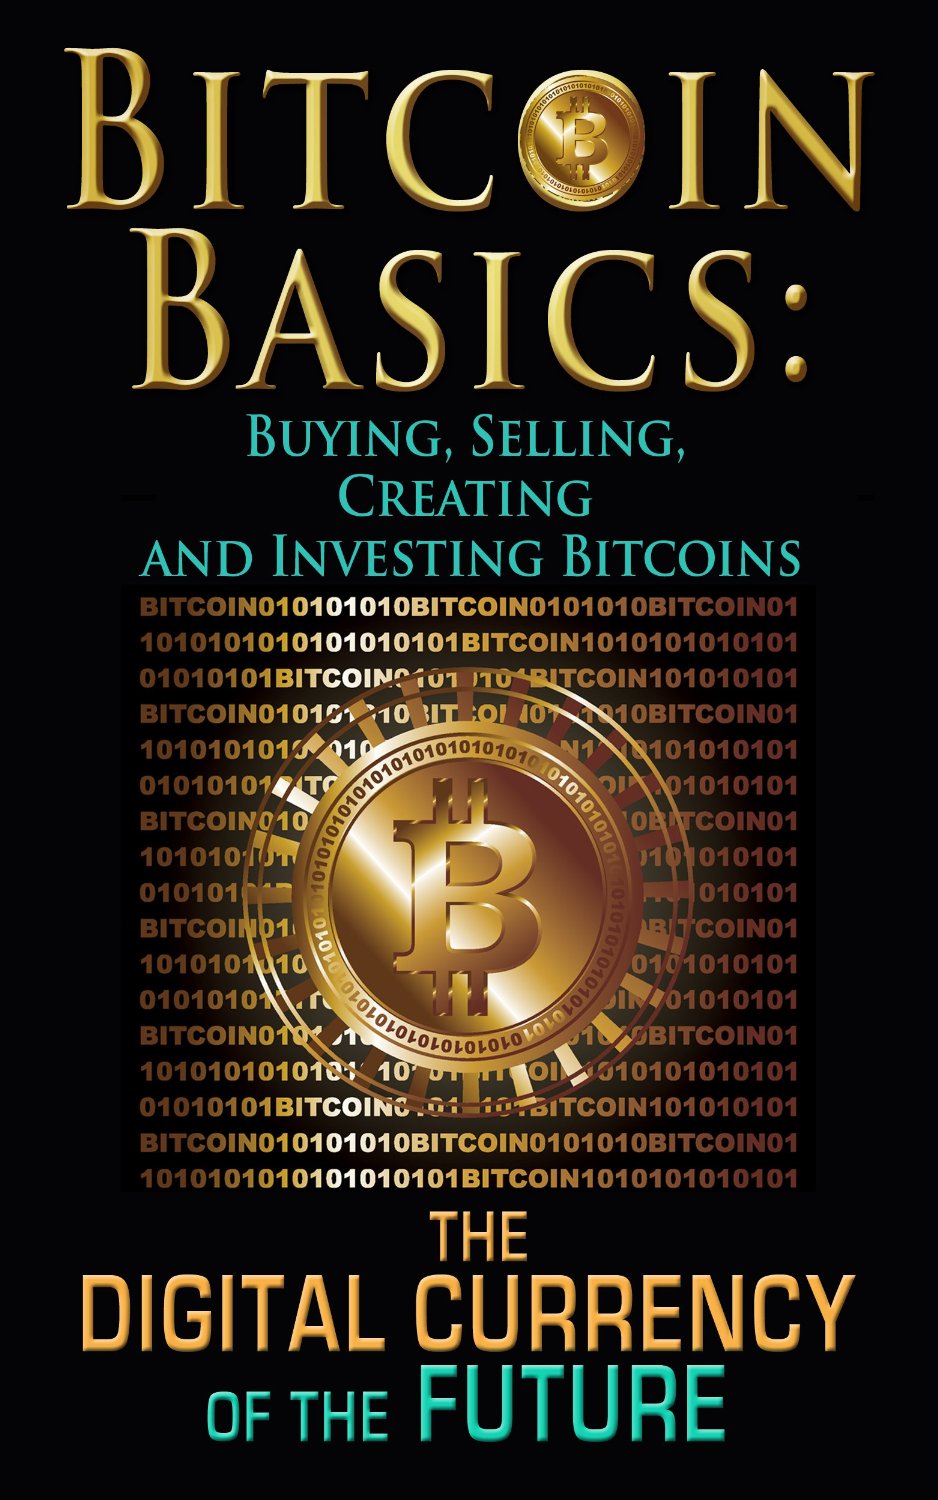 Bitcoin Basics: Buying, Selling, Creating and Investing Bitcoins – The Digital Currency of the Future by: Benjamin Tideas